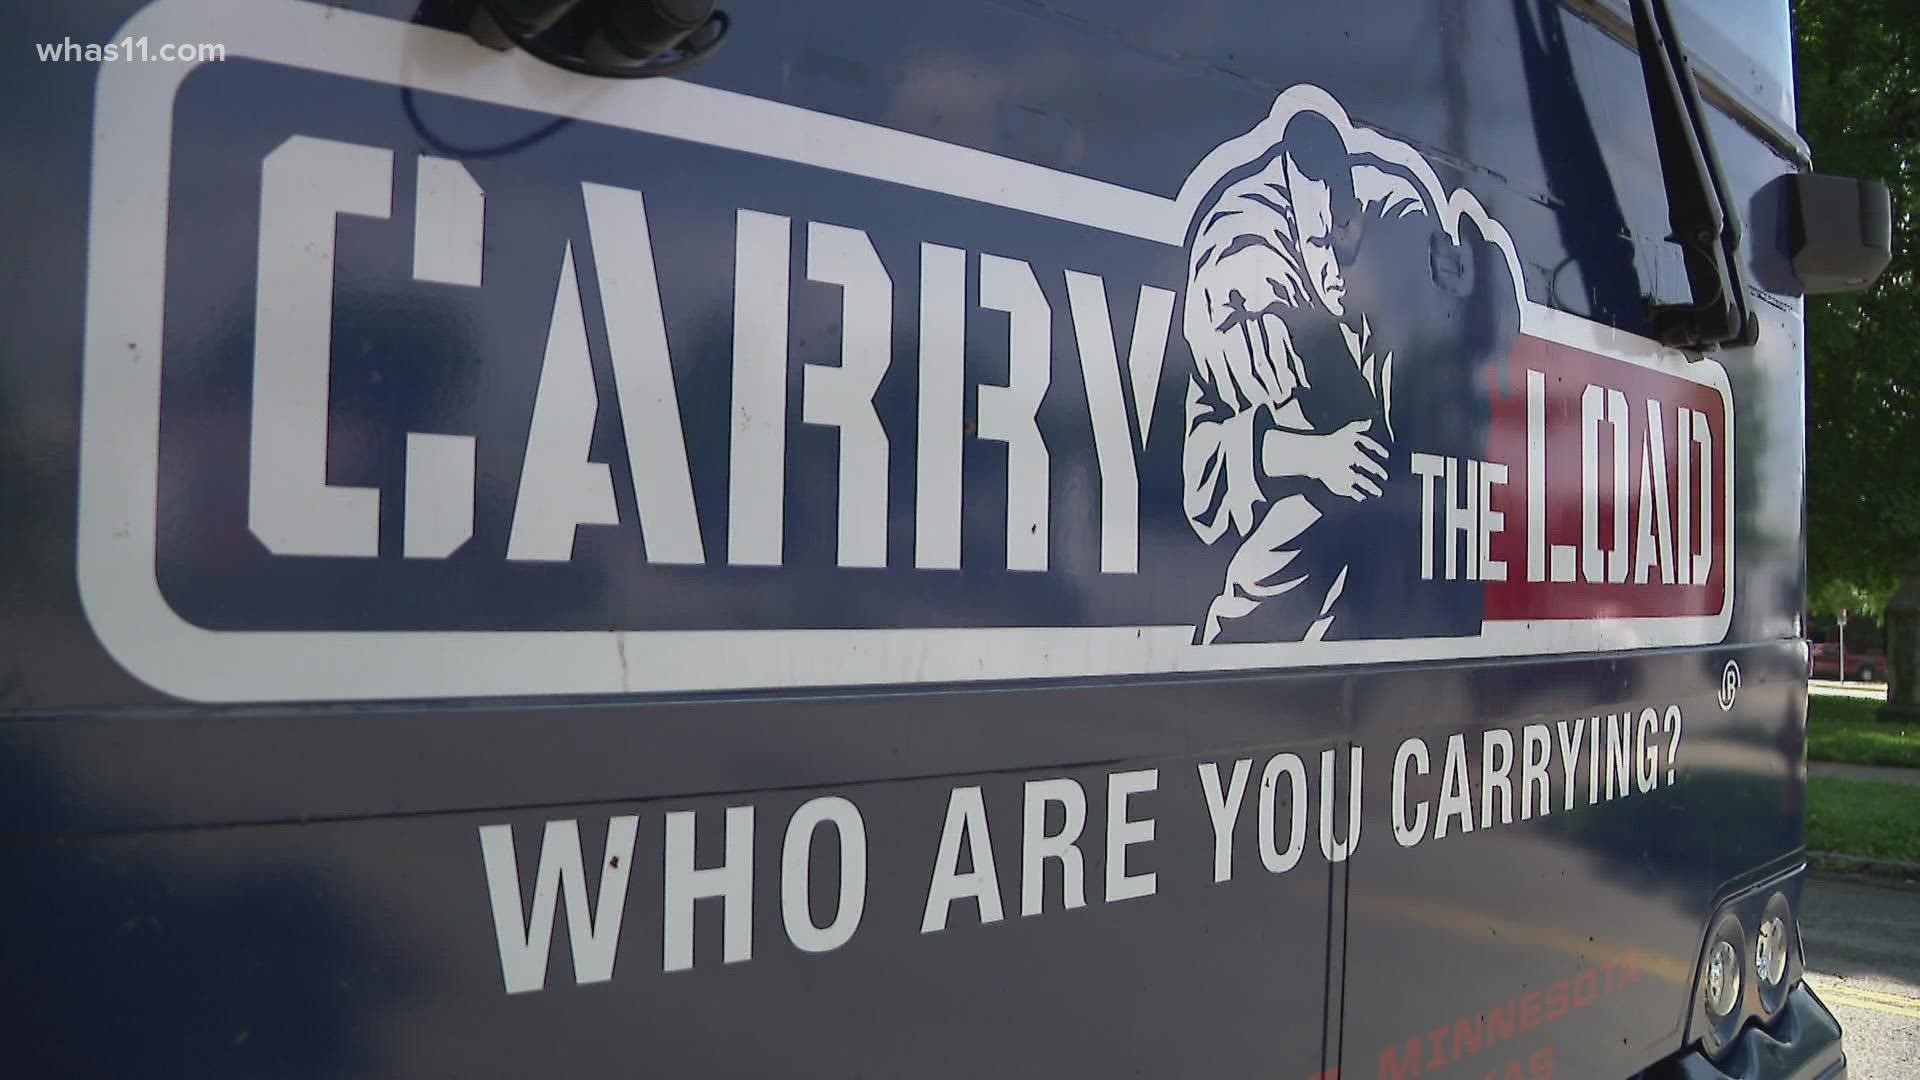 "Carry the load" is a non-profit group looking to restore the true meaning of Memorial Day.